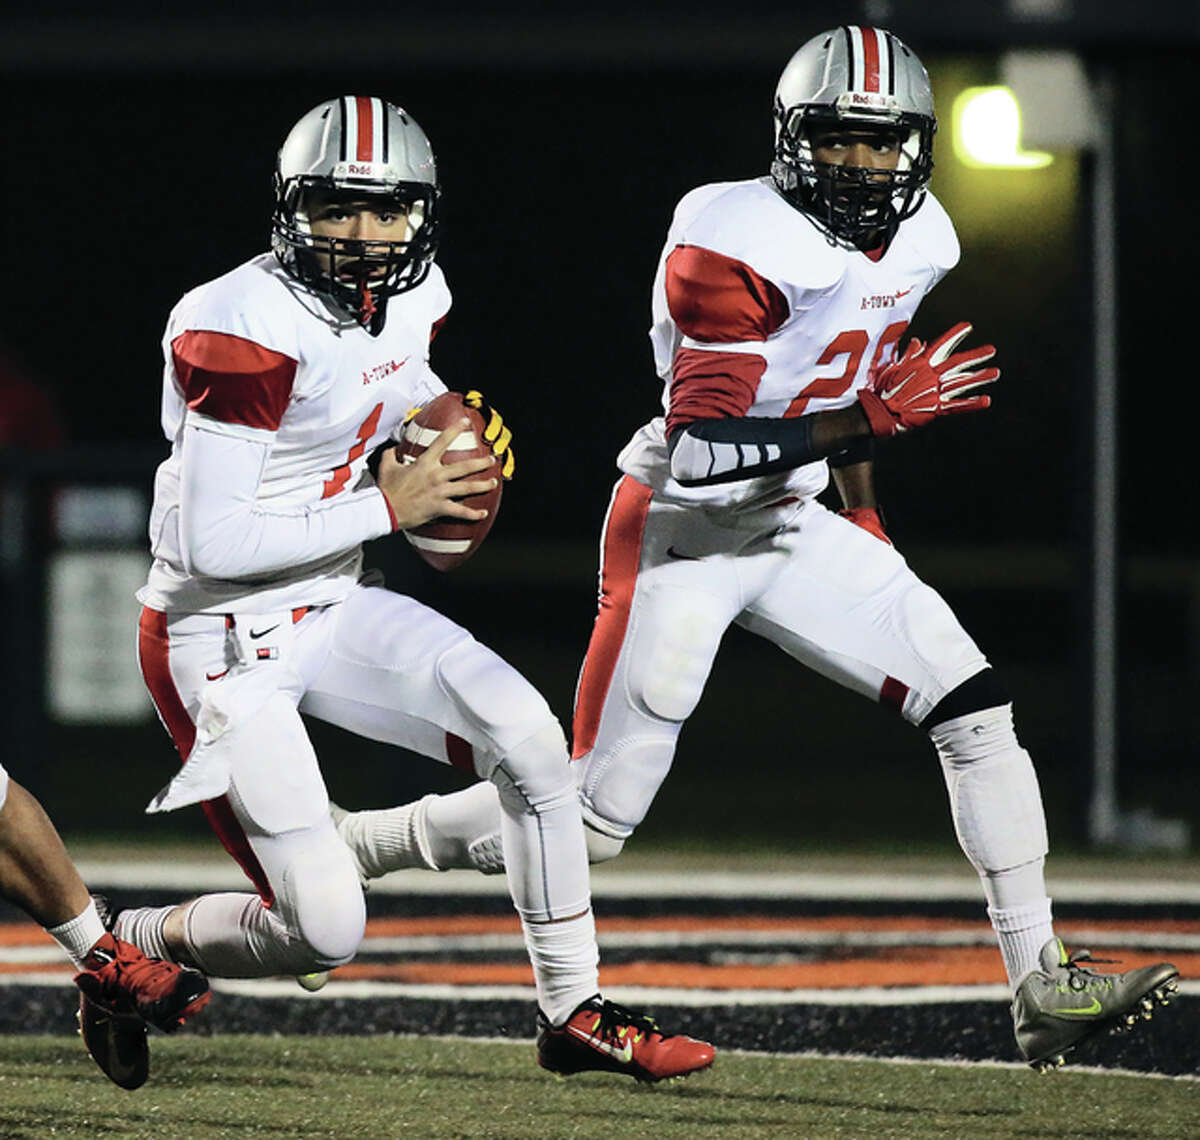 Alton quarterback Keenan Stegall (left) looks for room to run while running back Asa Collins follows the play as a pitch option during last Friday’s Southwestern Conference football game at the District 7 Sports Complex in Edwardsville.